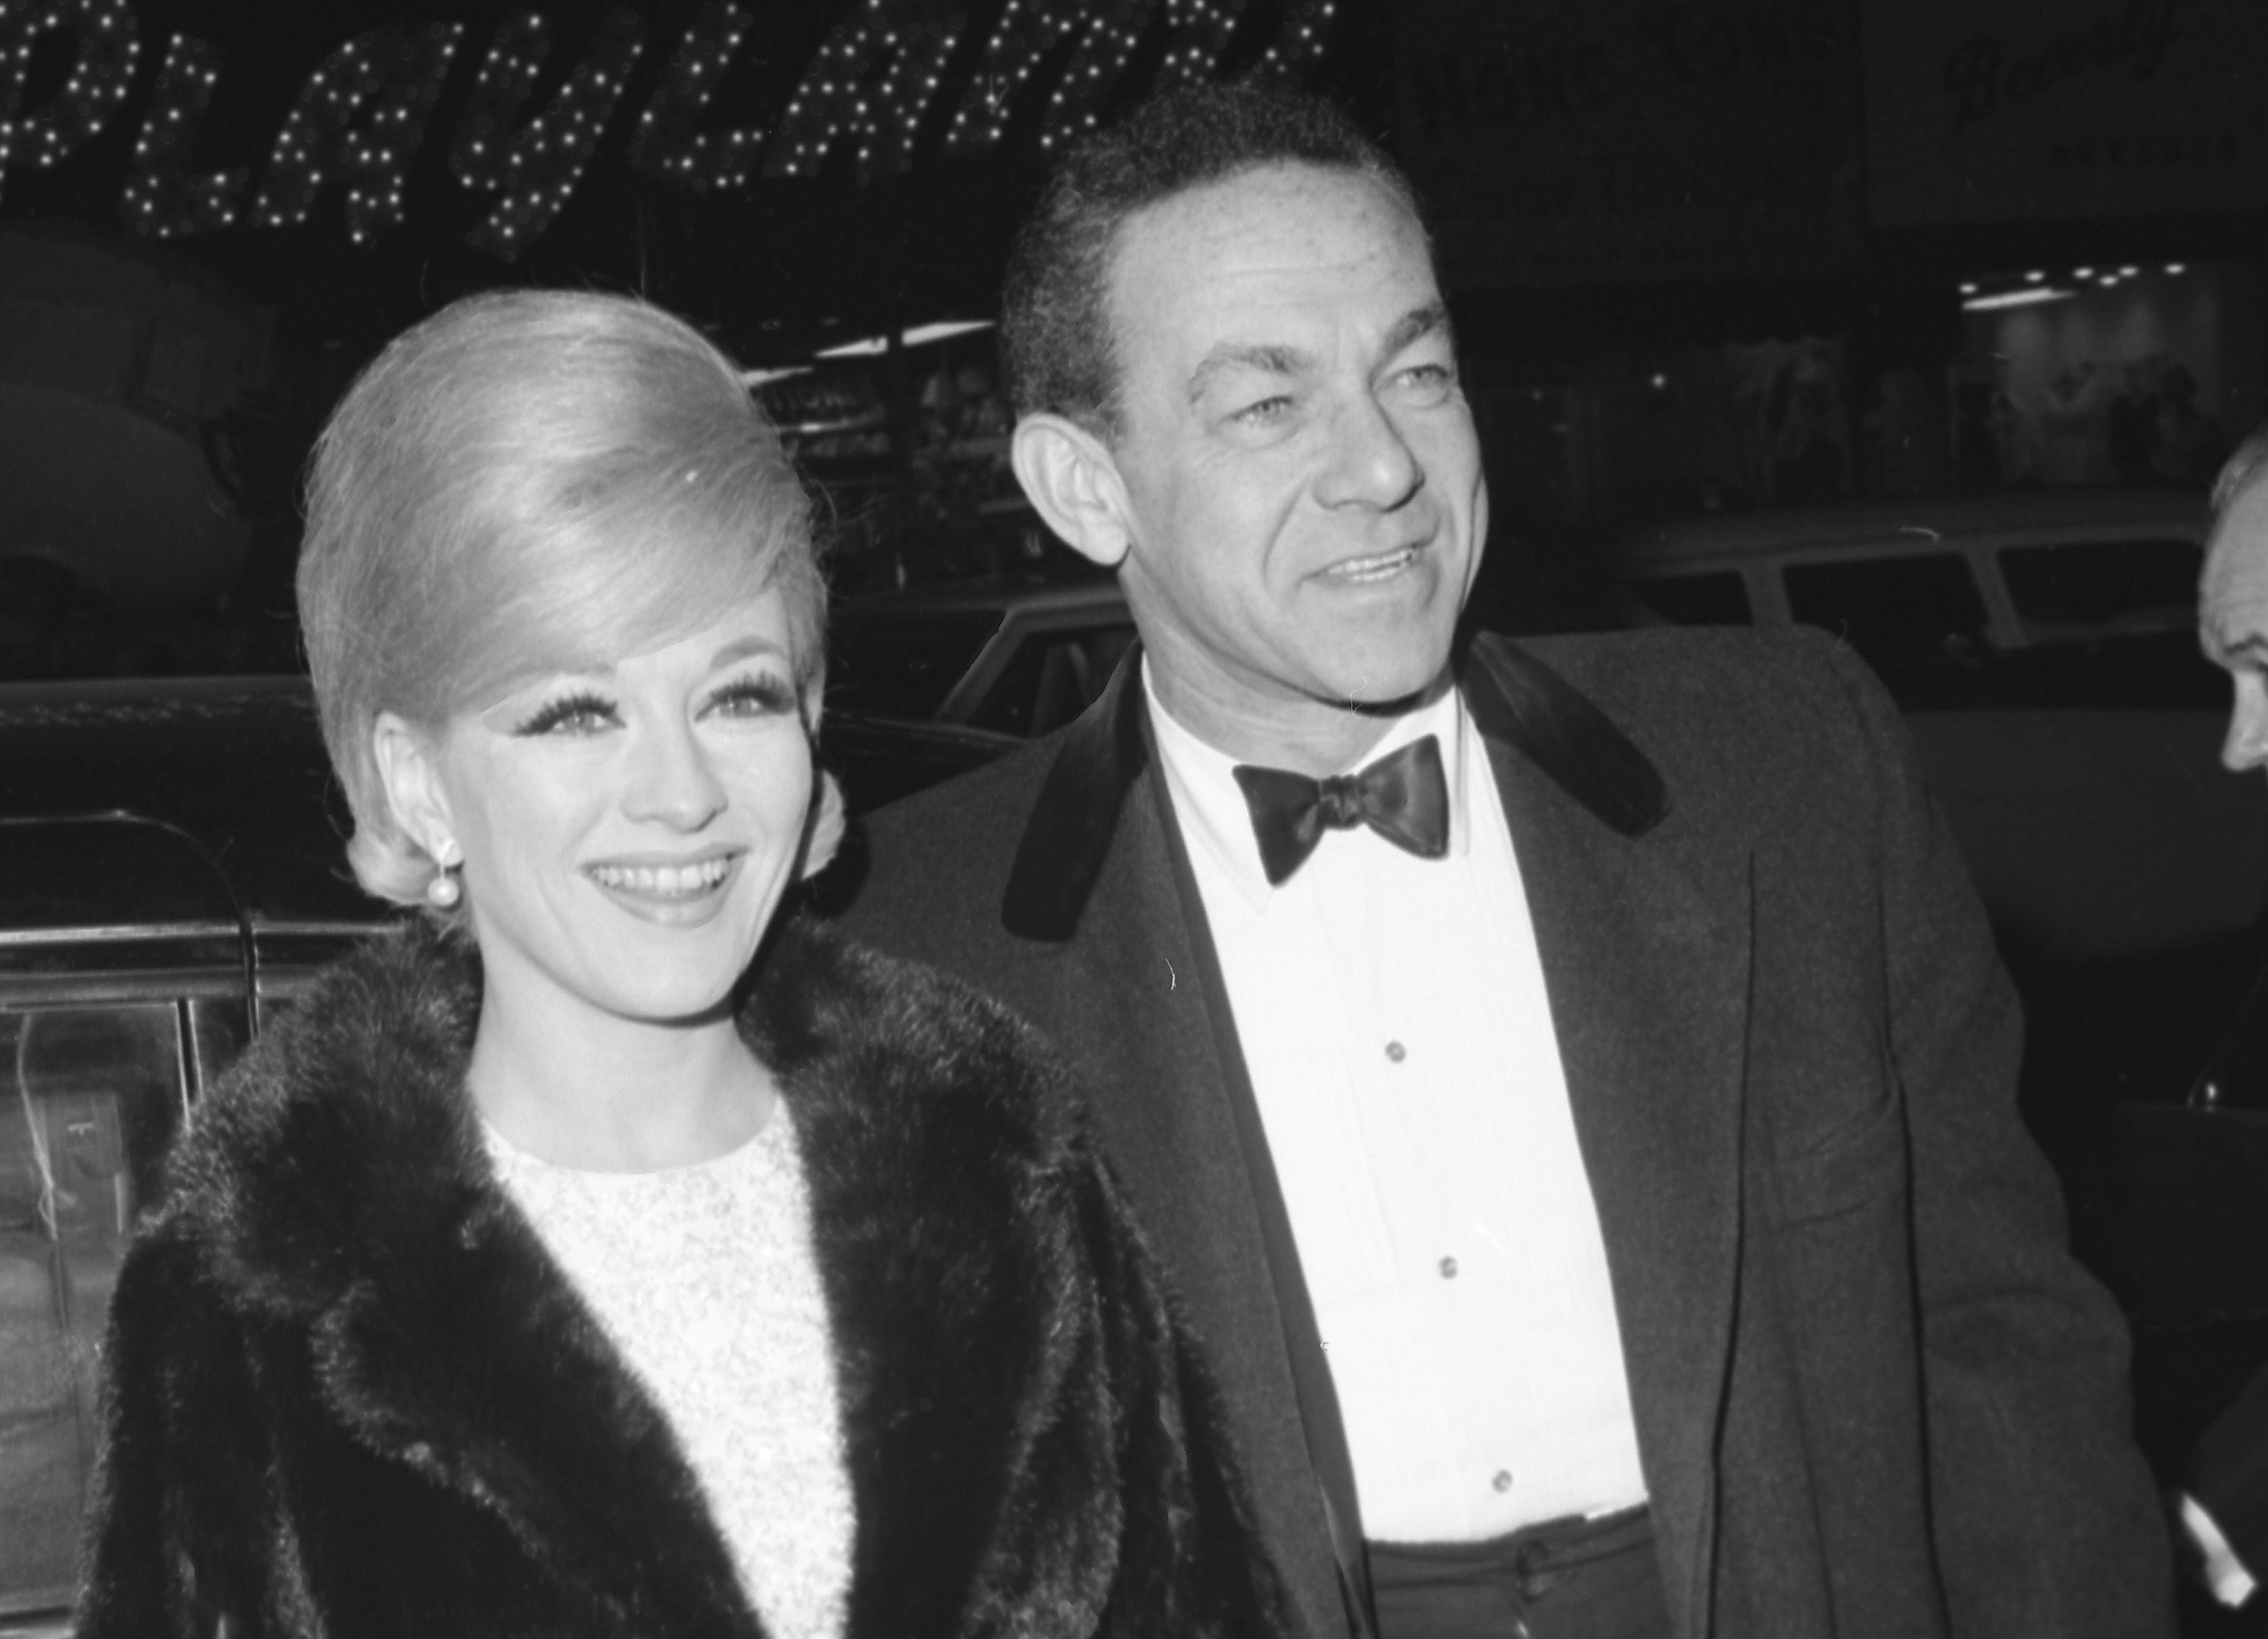 Paula Stewart and her second husband Jack Carter arrive at the premier of "Goldfinger" at DeMille Theater, on December 22, 1964. | Source: Getty Images